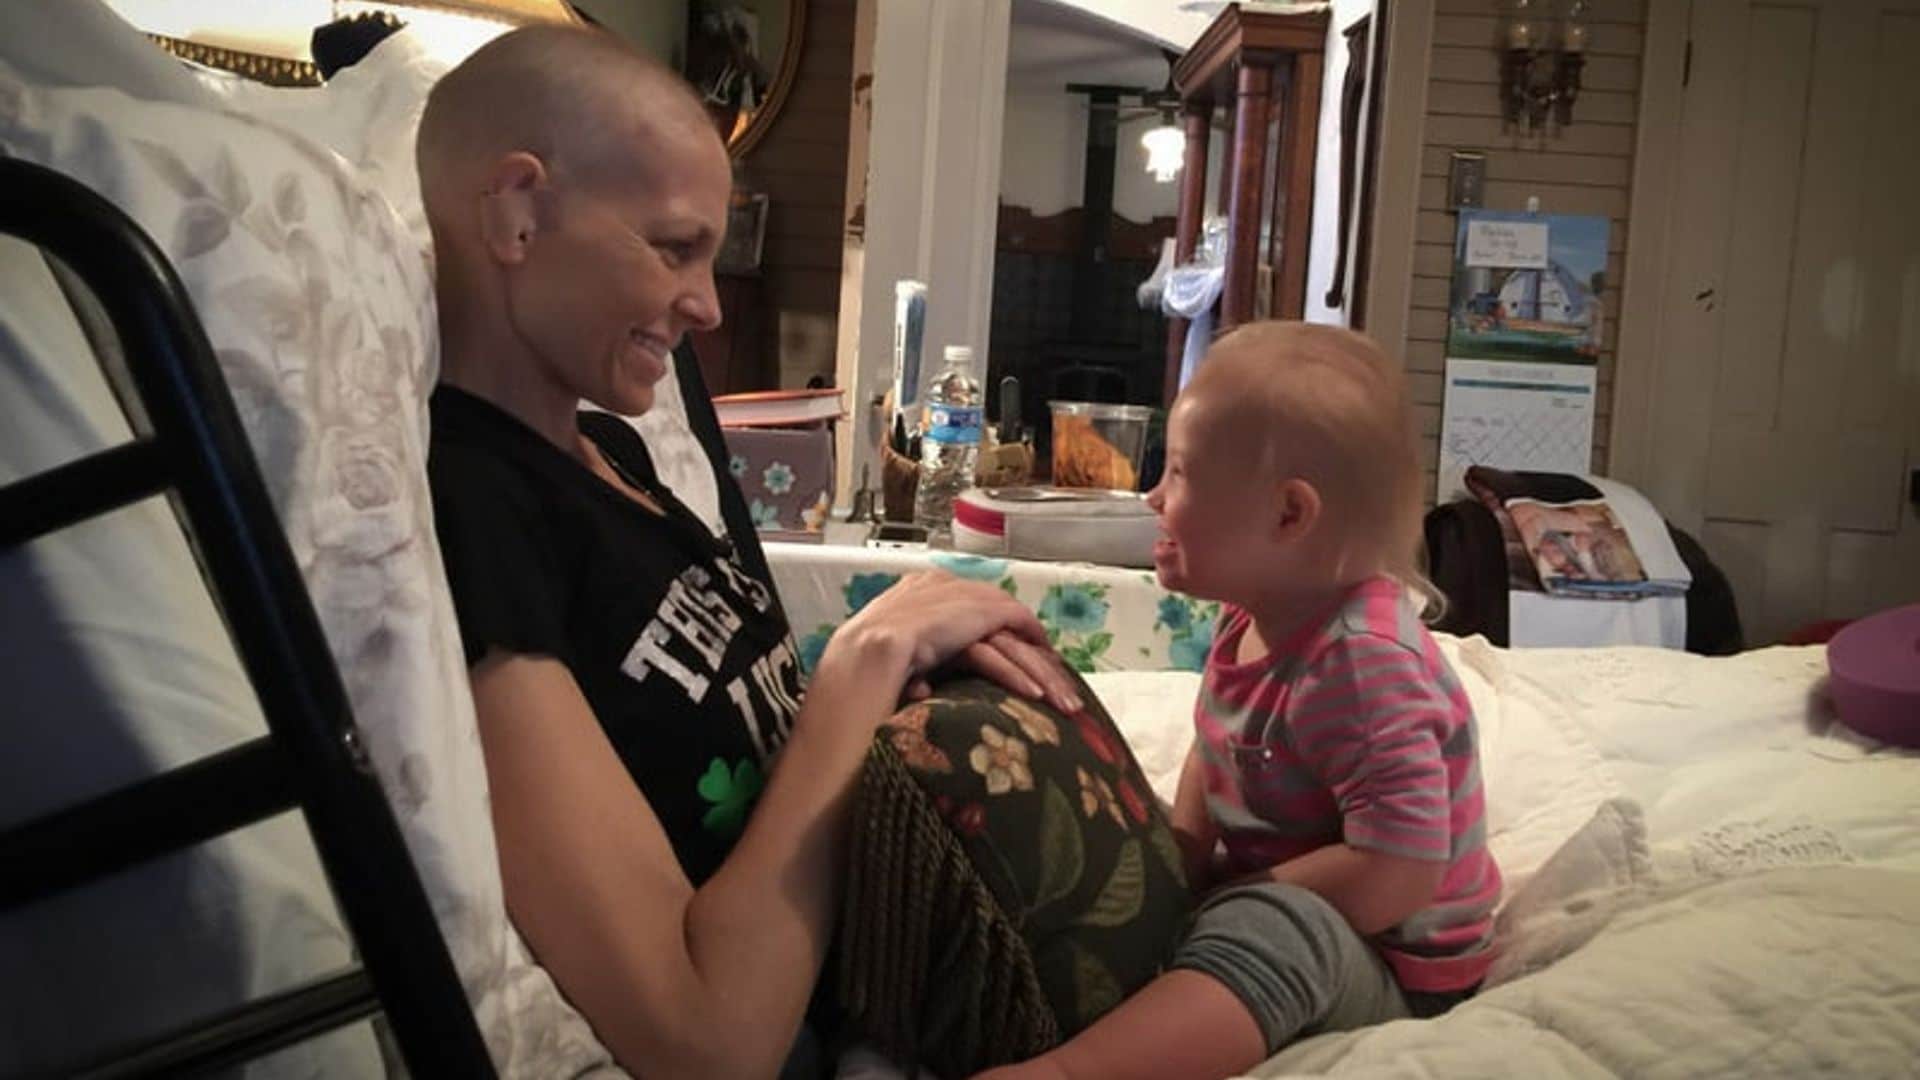 Joey Feek is now bedridden but believes she can 'beat' her terminal cancer